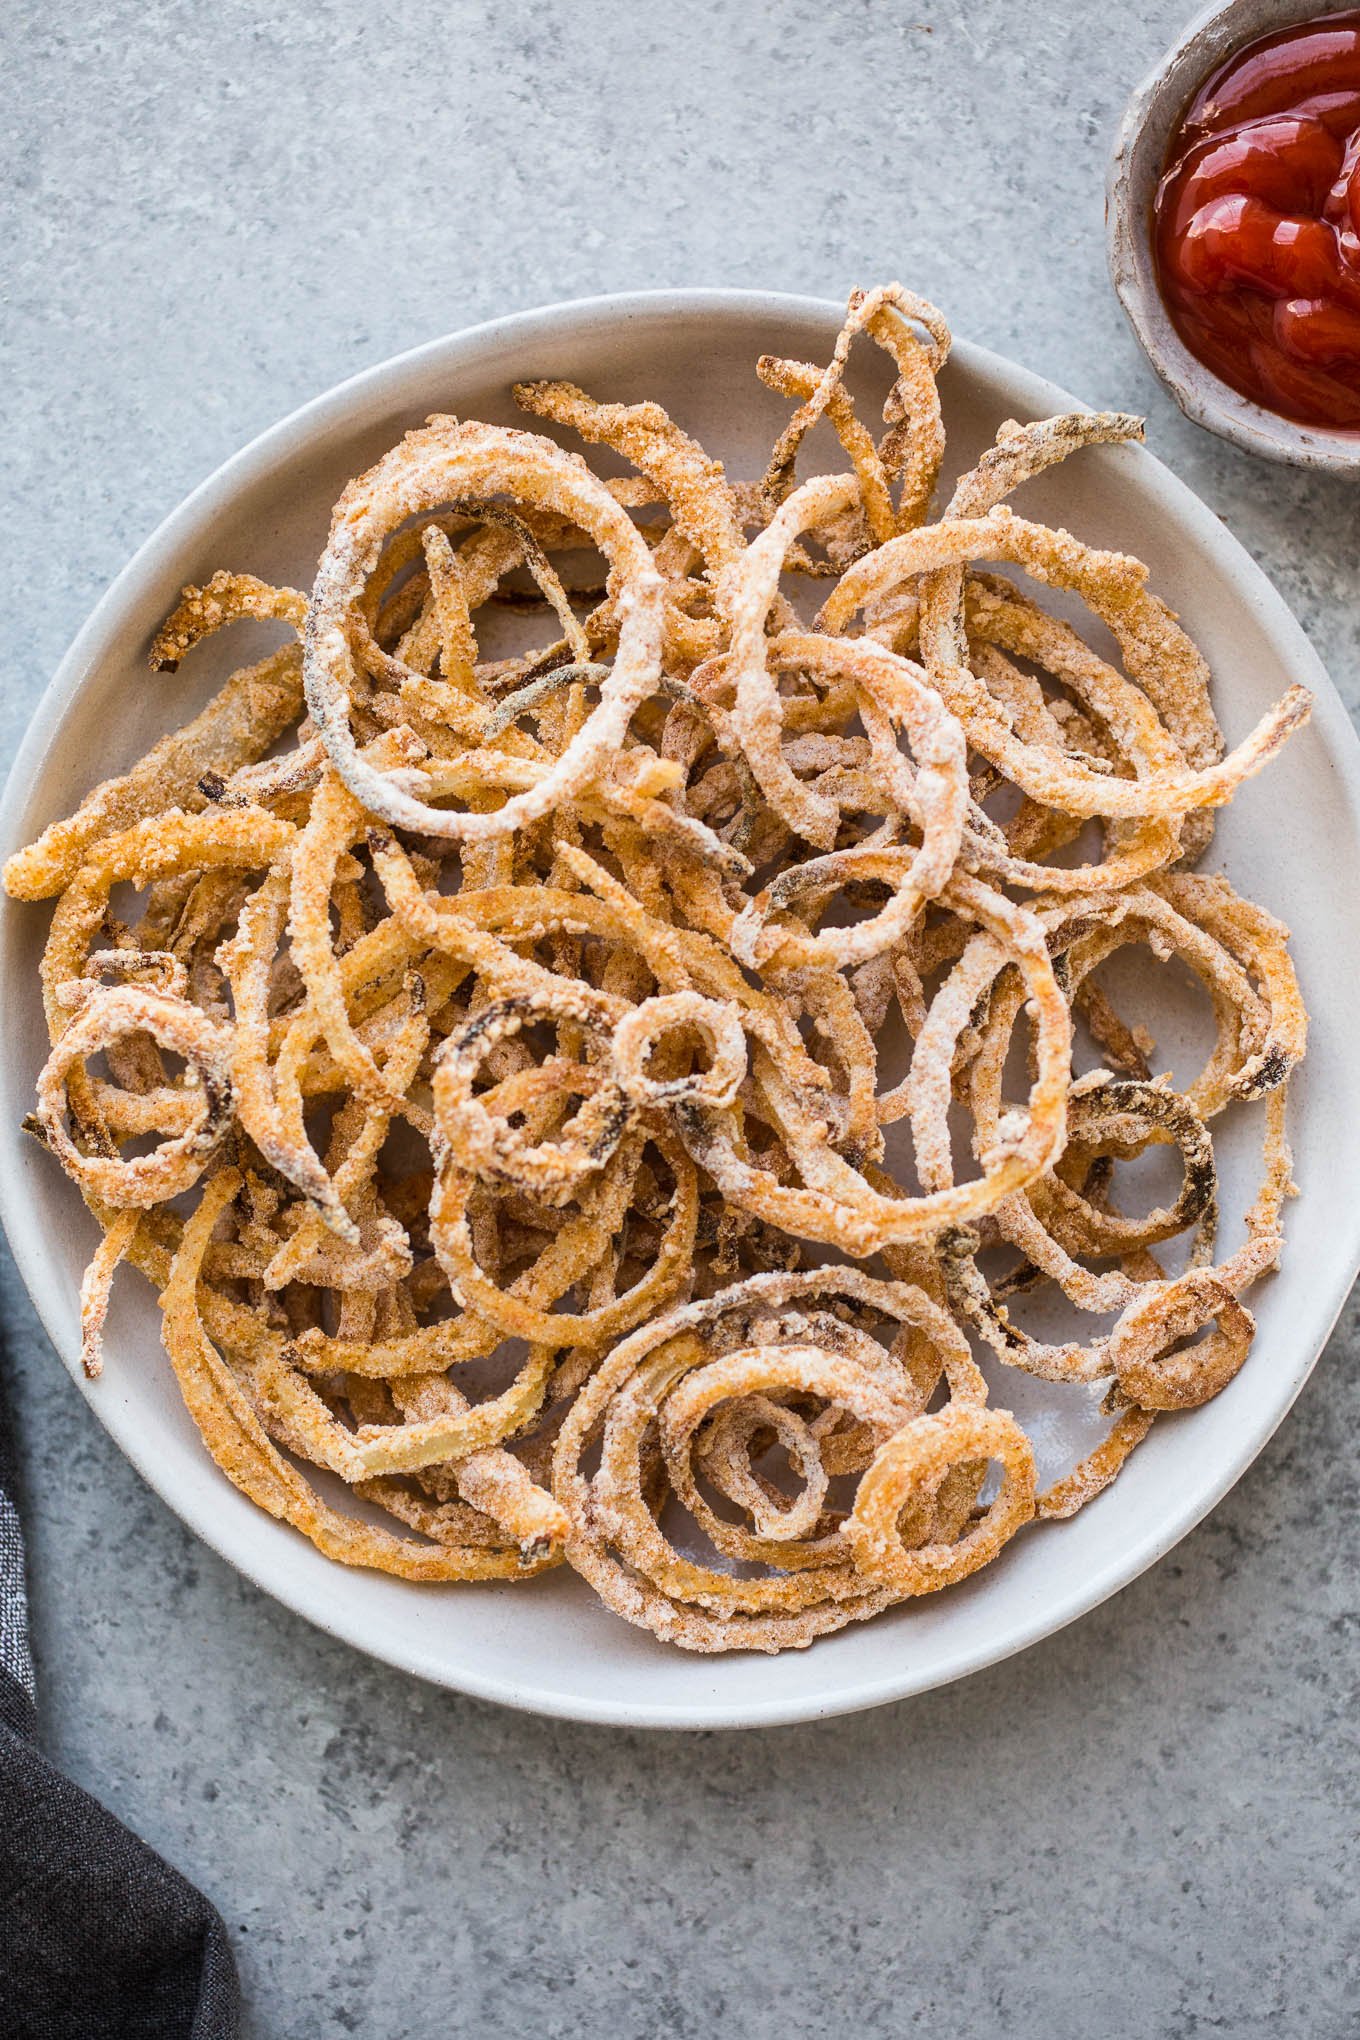 A Gluten-Free Onion Strings recipe that is baked, not fried. Made with white rice flour, dairy-free buttermilk, and spices, these won't last long! 